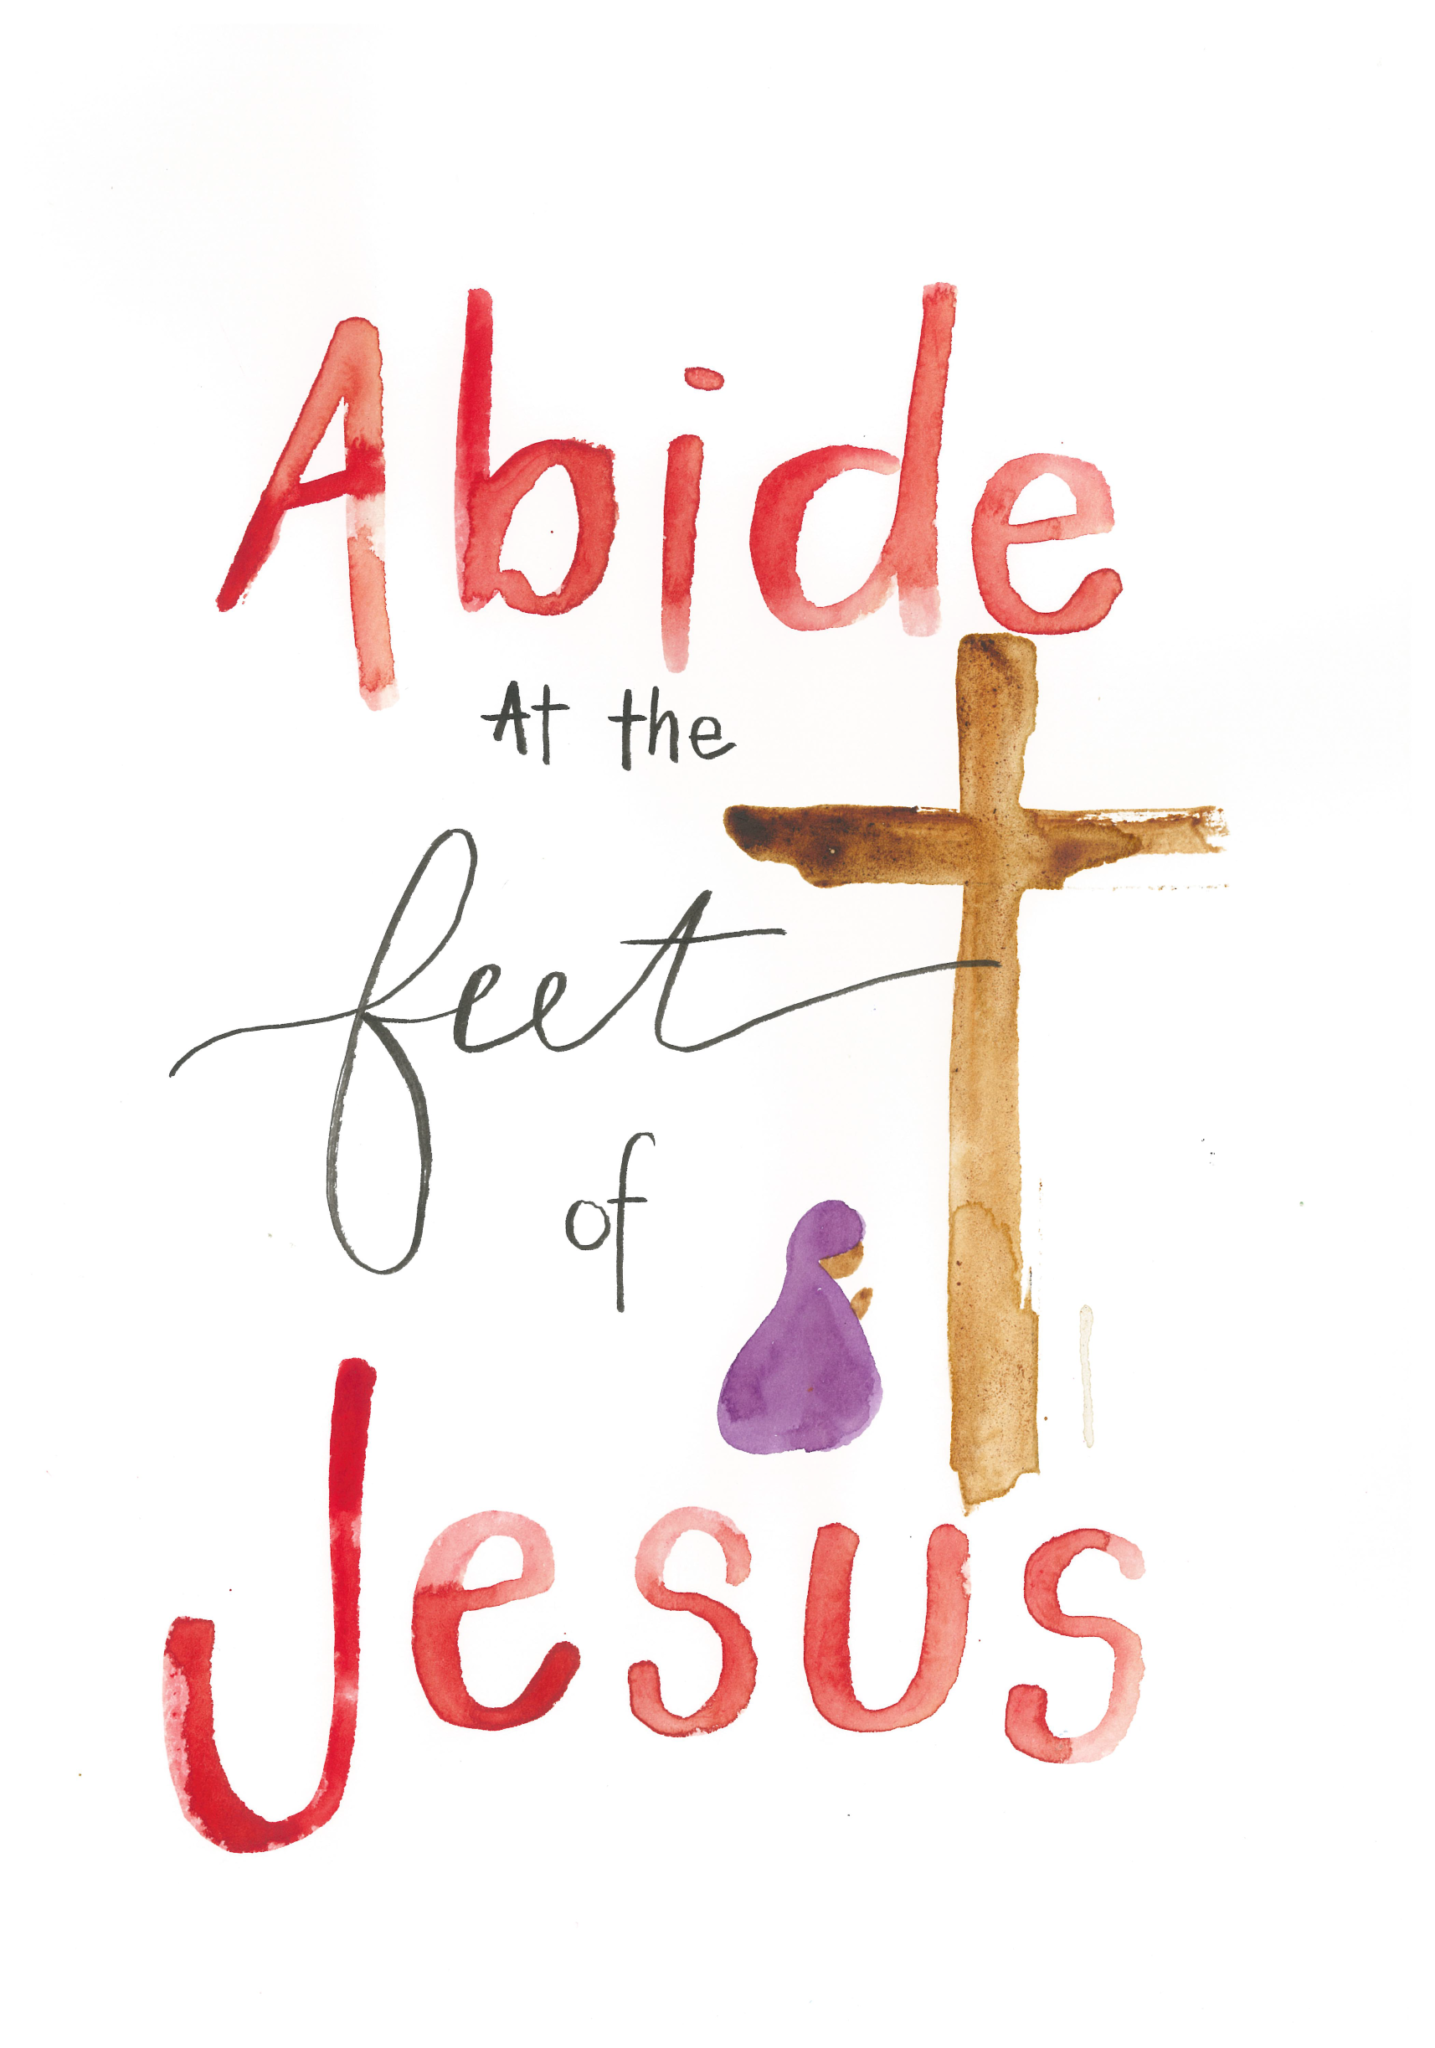 A woman praying at the foot of the cross and the words "abide at the feet of Jesus"